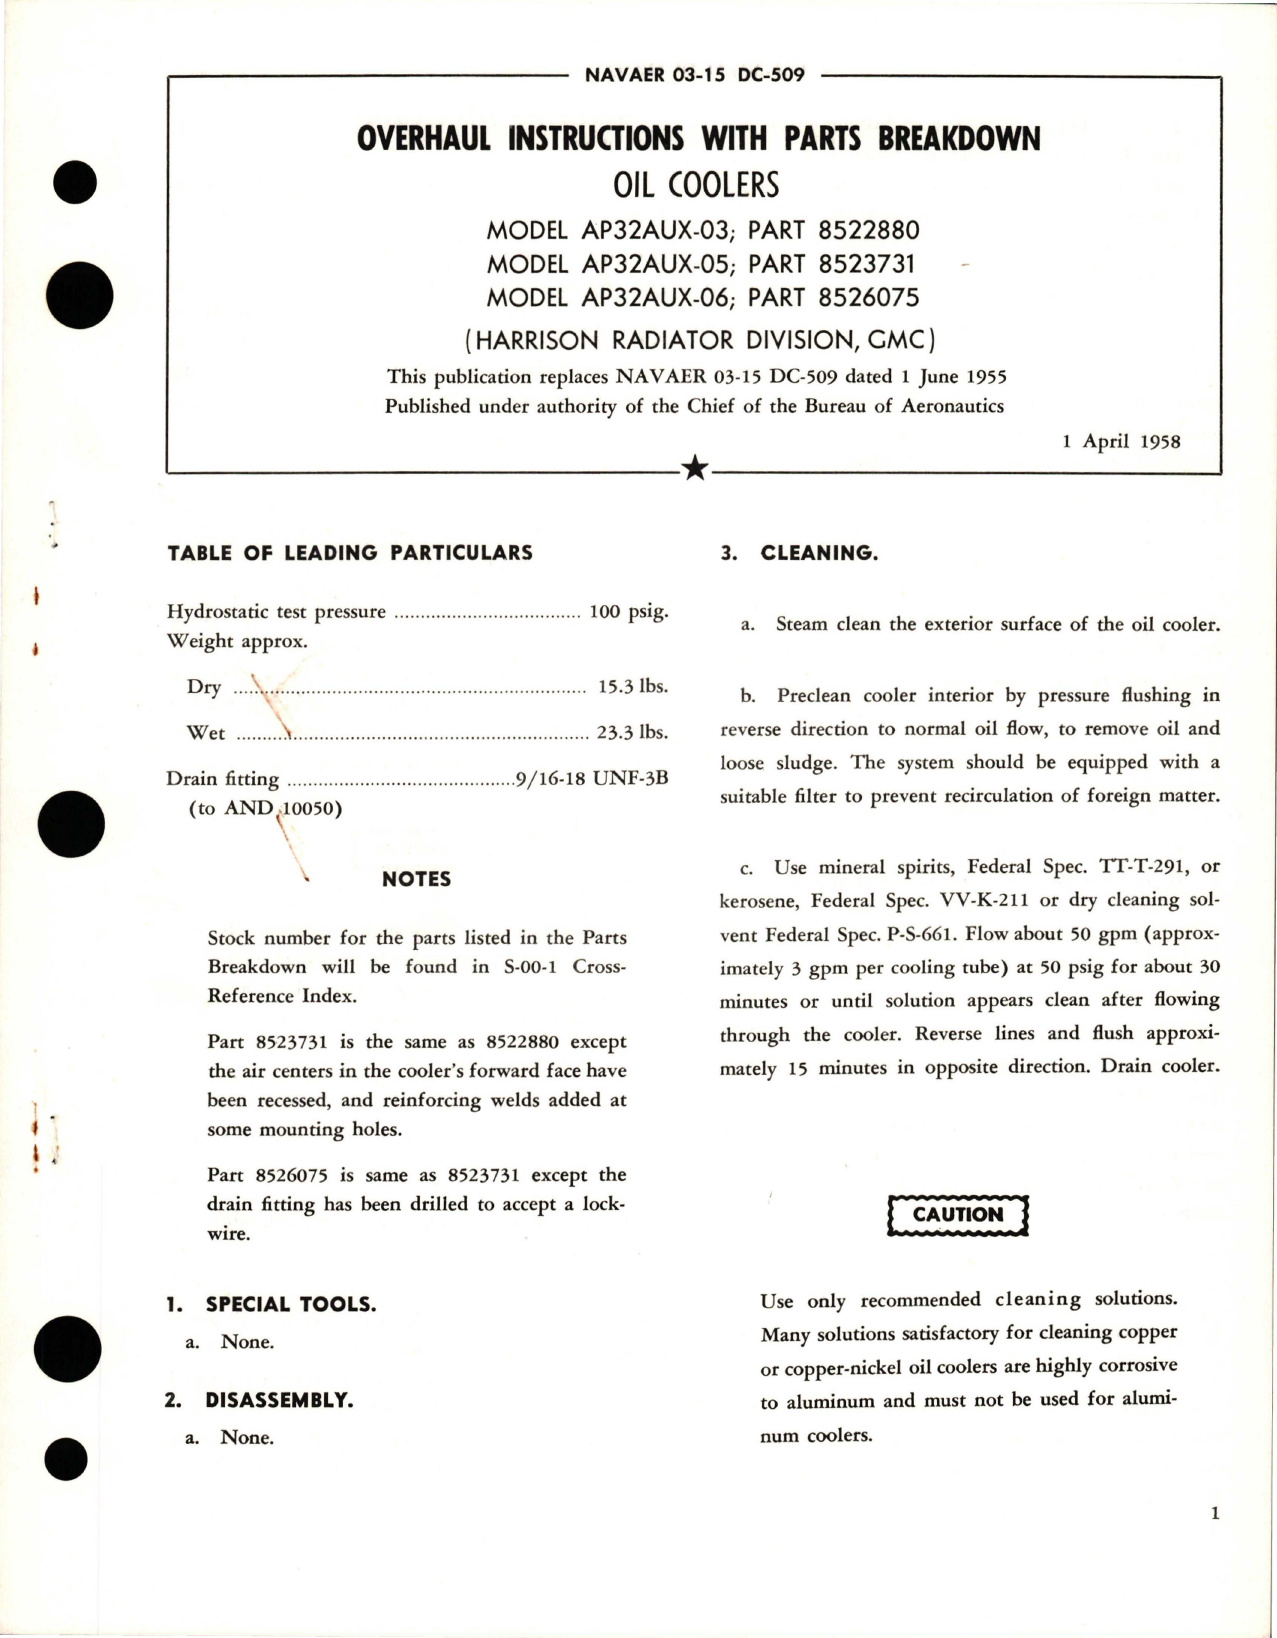 Sample page 1 from AirCorps Library document: Overhaul Instructions with Parts for Oil Cooler Assembly - Model AP30AU35-01 - Model 8518656